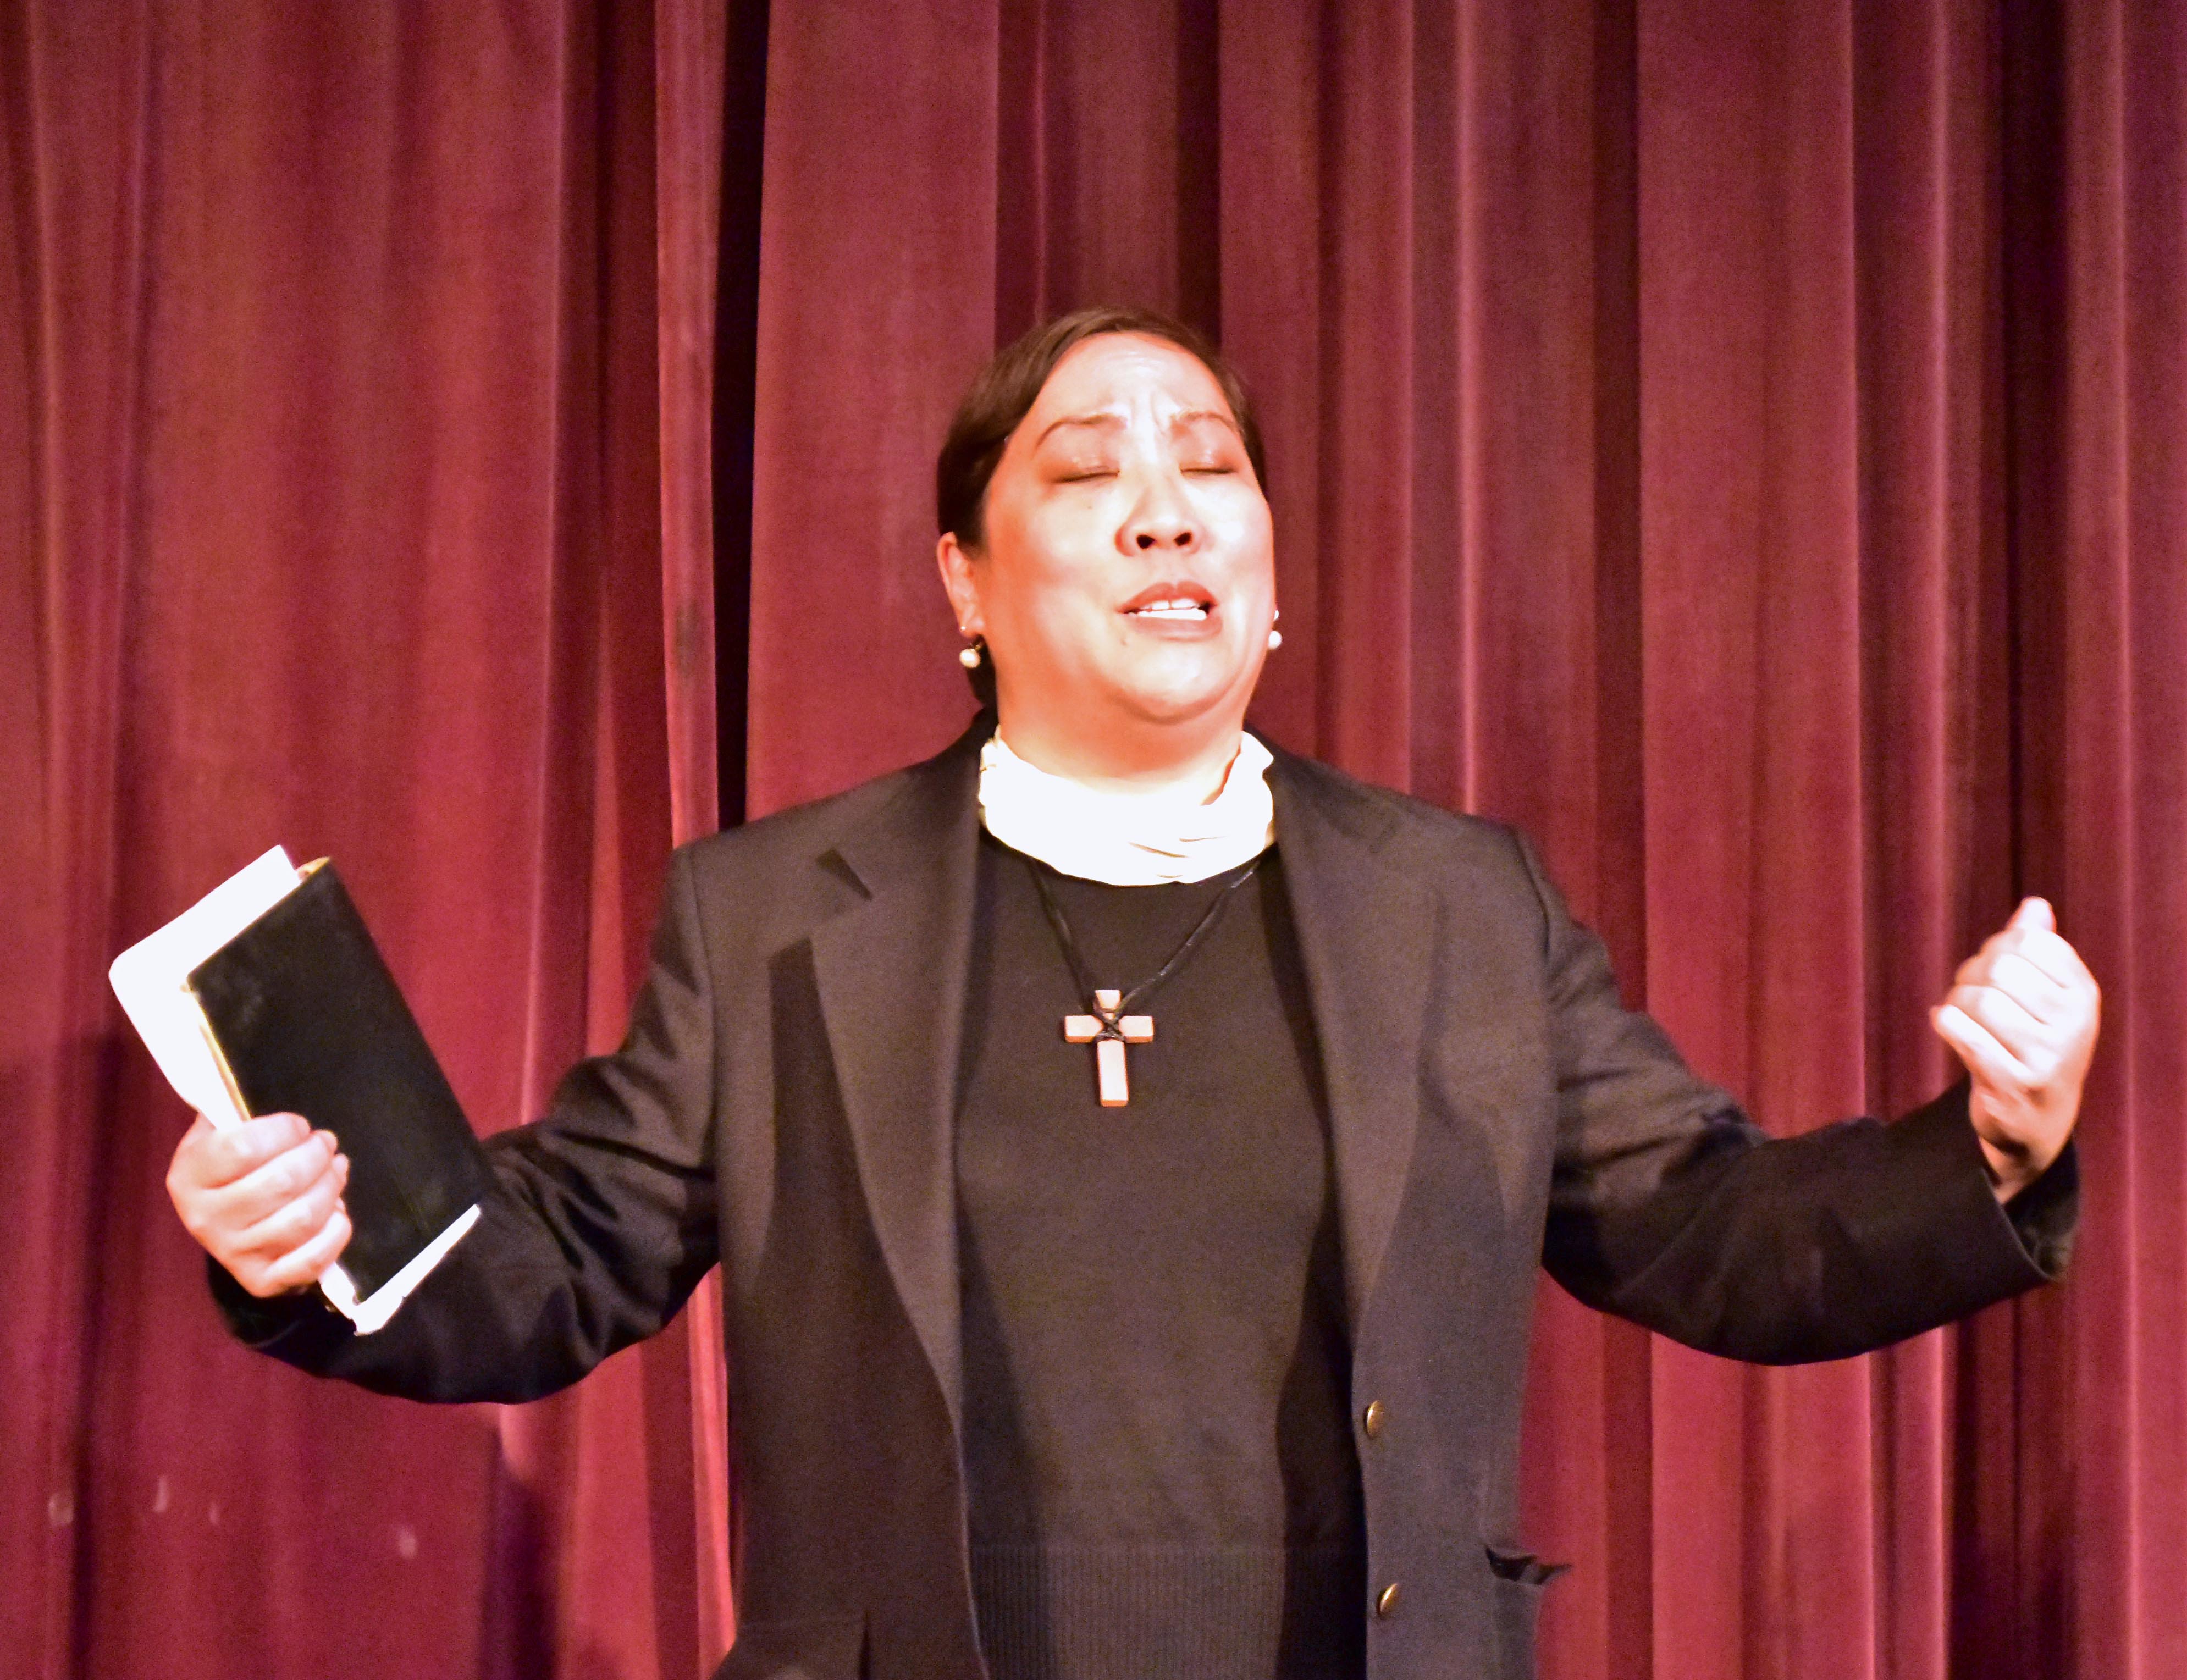 ppf-best-christmas-pageant-ever-sally-flores-as-rev-hopkins-photo-by-chip-gertzog-providence-players